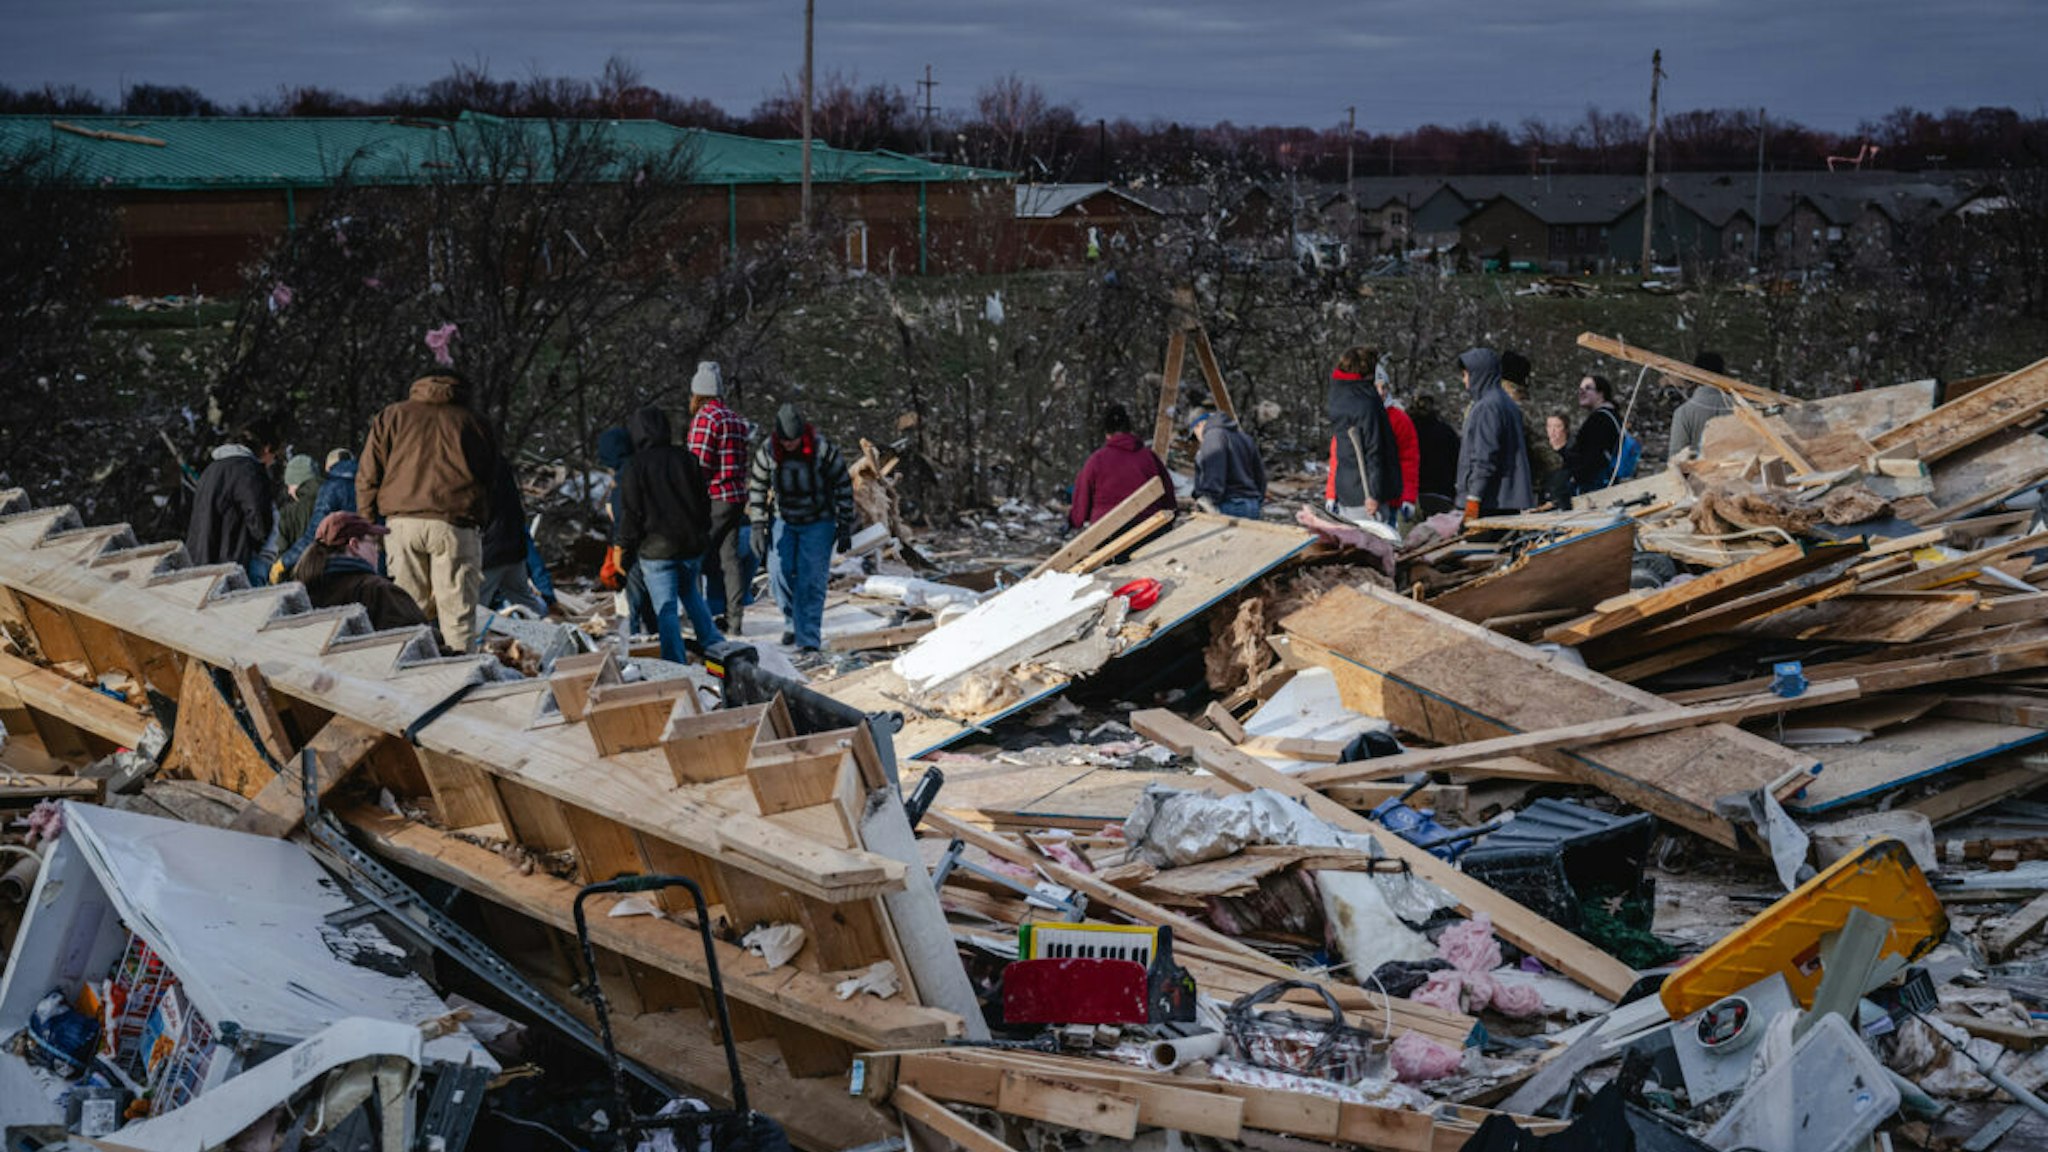 CLARKSVILLE, TENNESSEE - DECEMBER 10: Residents and visitors work to clear debris in search of pets and belongings of a destroyed home in the aftermath of a tornado on December 10, 2023 in Clarksville, Tennessee. Multiple long-track tornadoes were reported in northwest Tennessee on December 9th causing multiple deaths and injuries and widespread damage.